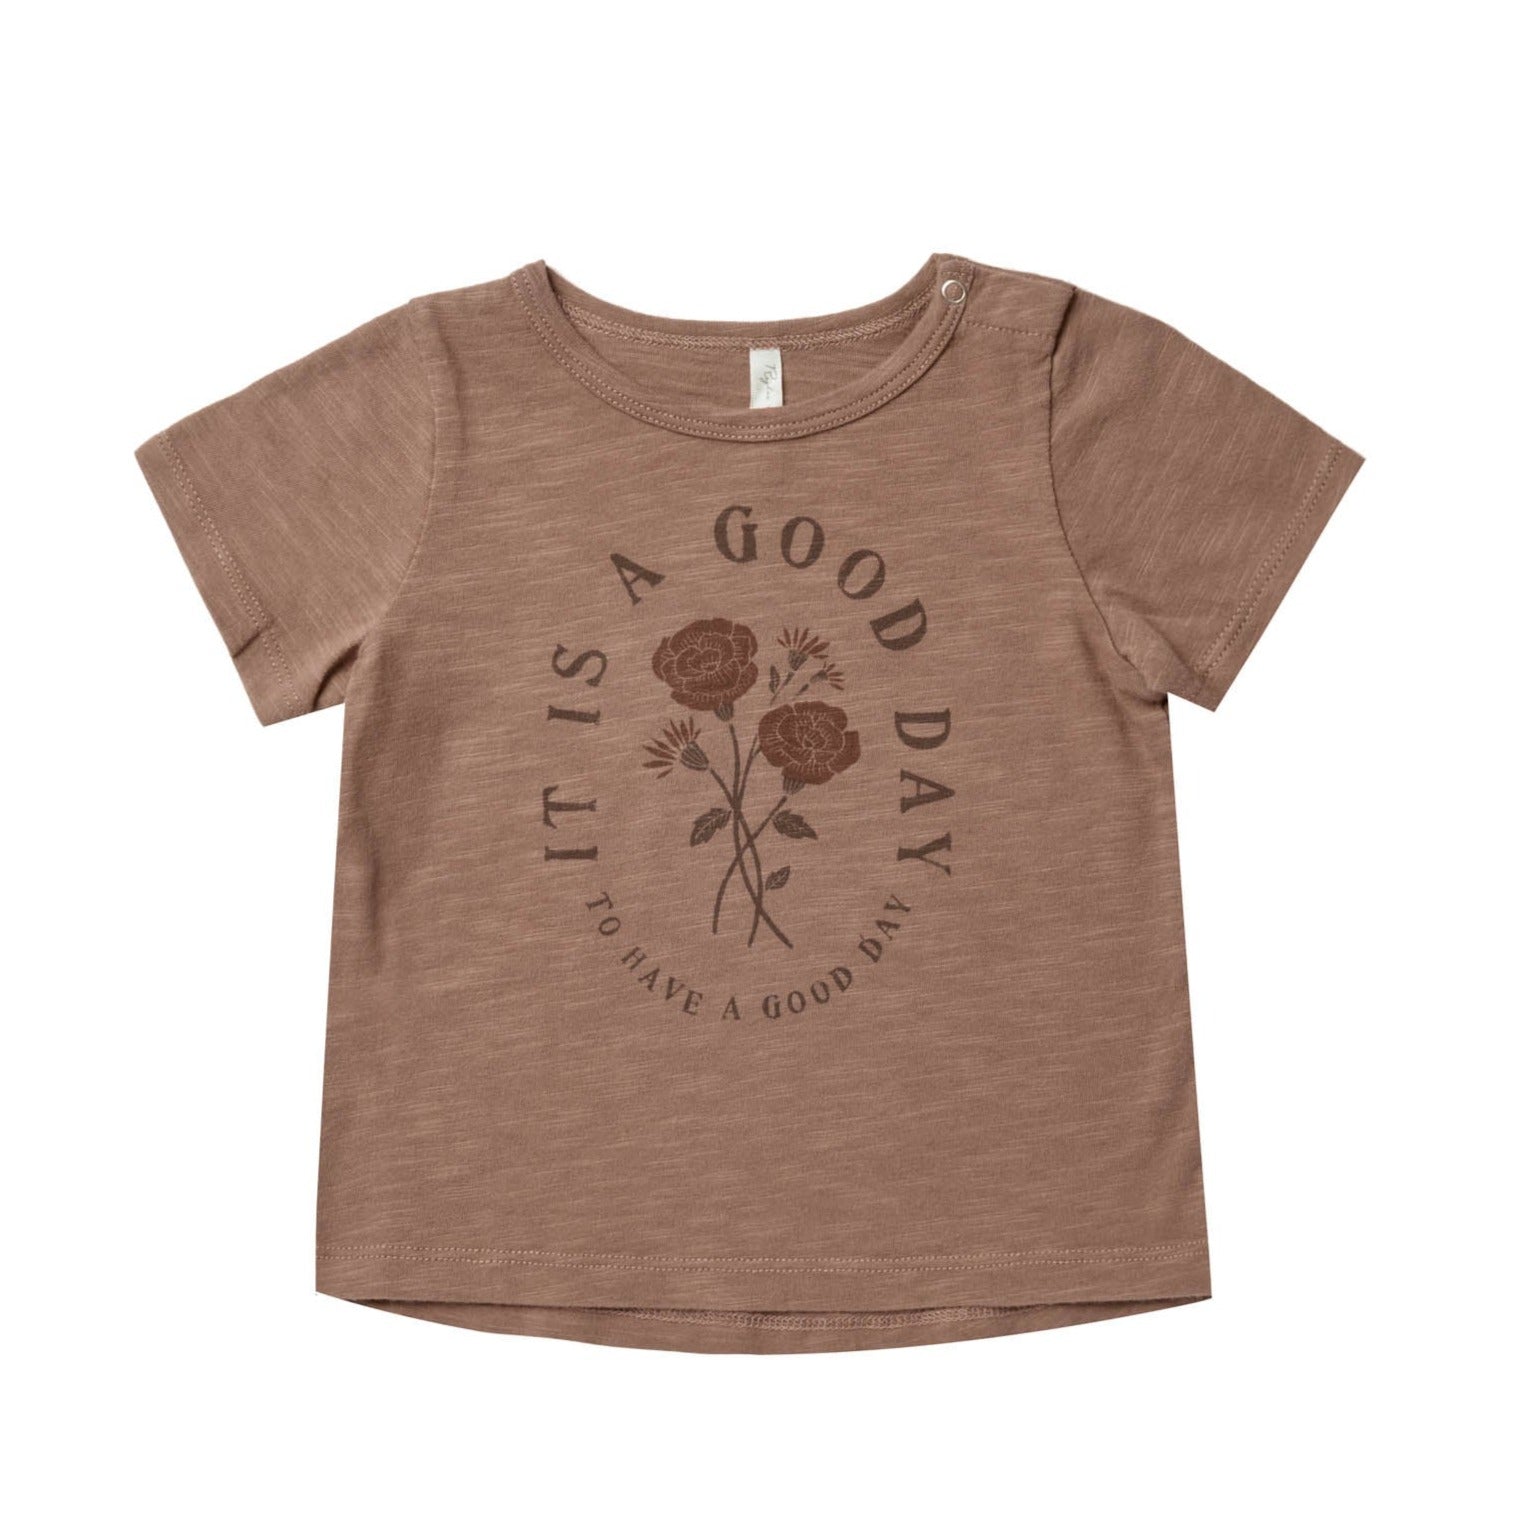 Trendy baby tee by Rylee and Cru  It's a Good Day at Bonjour Baby Baskets